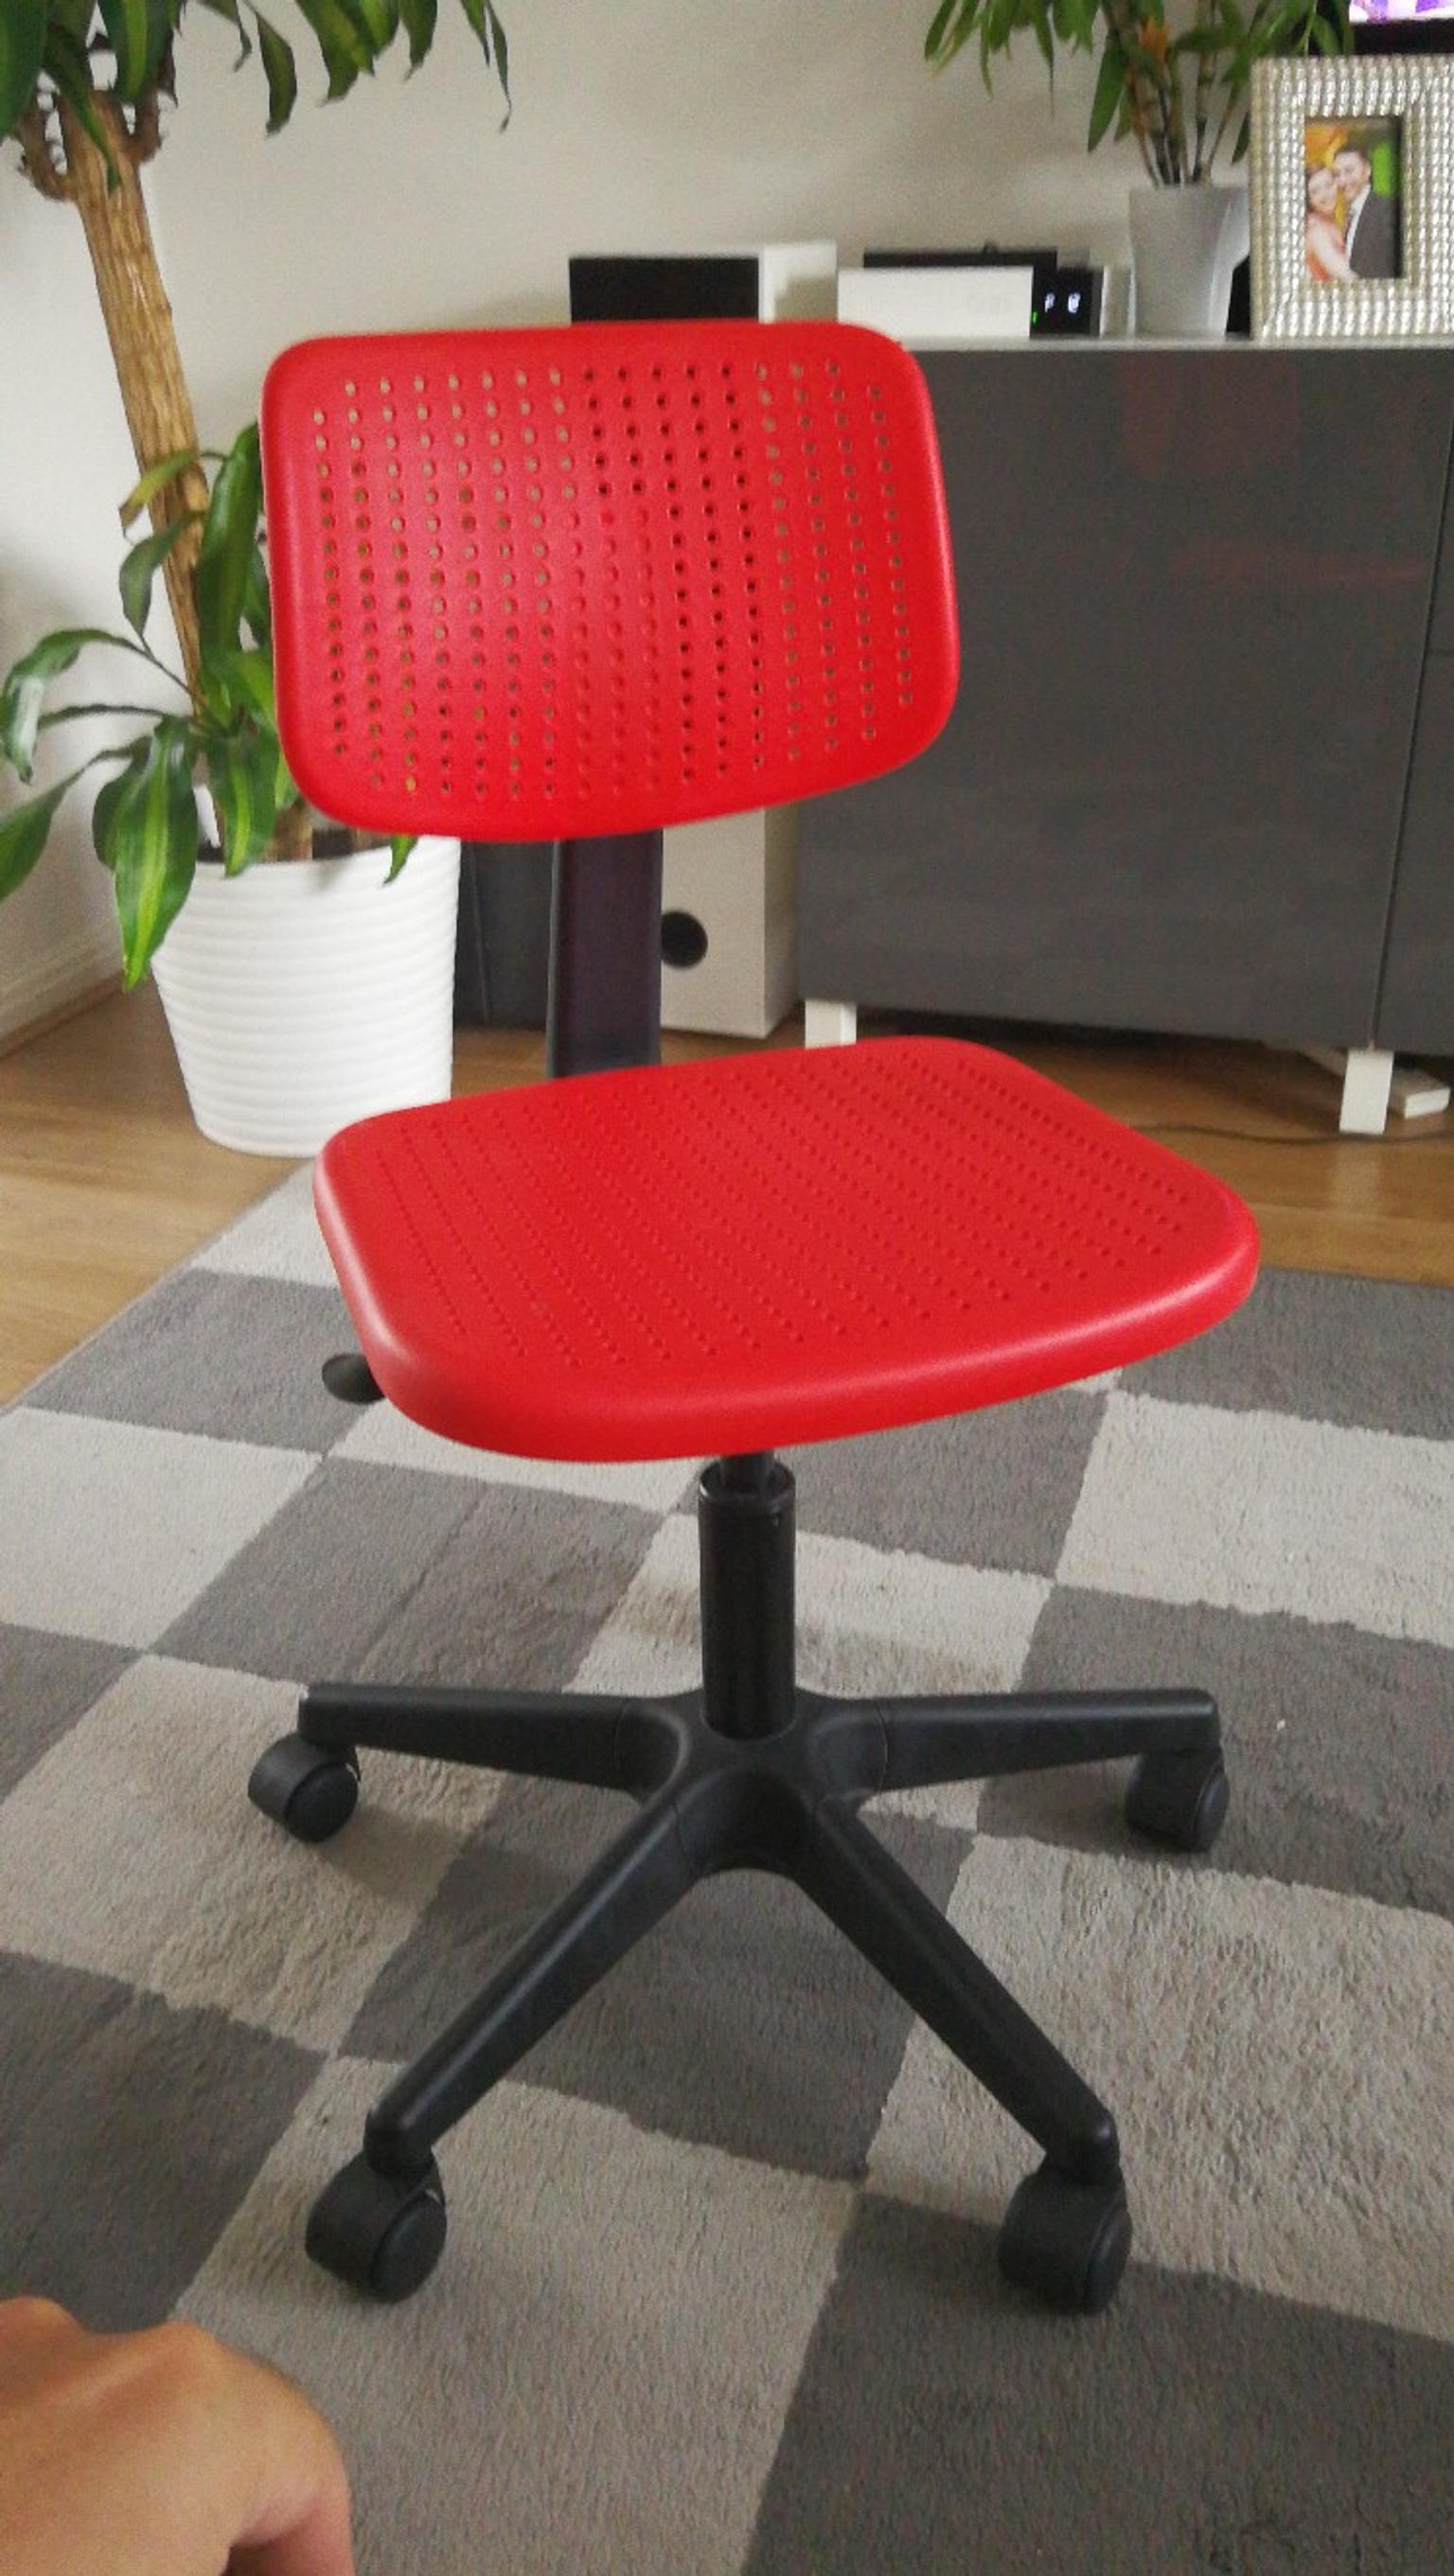 Ikea Kids Desk Chair In Chester For 10 00 For Sale Shpock